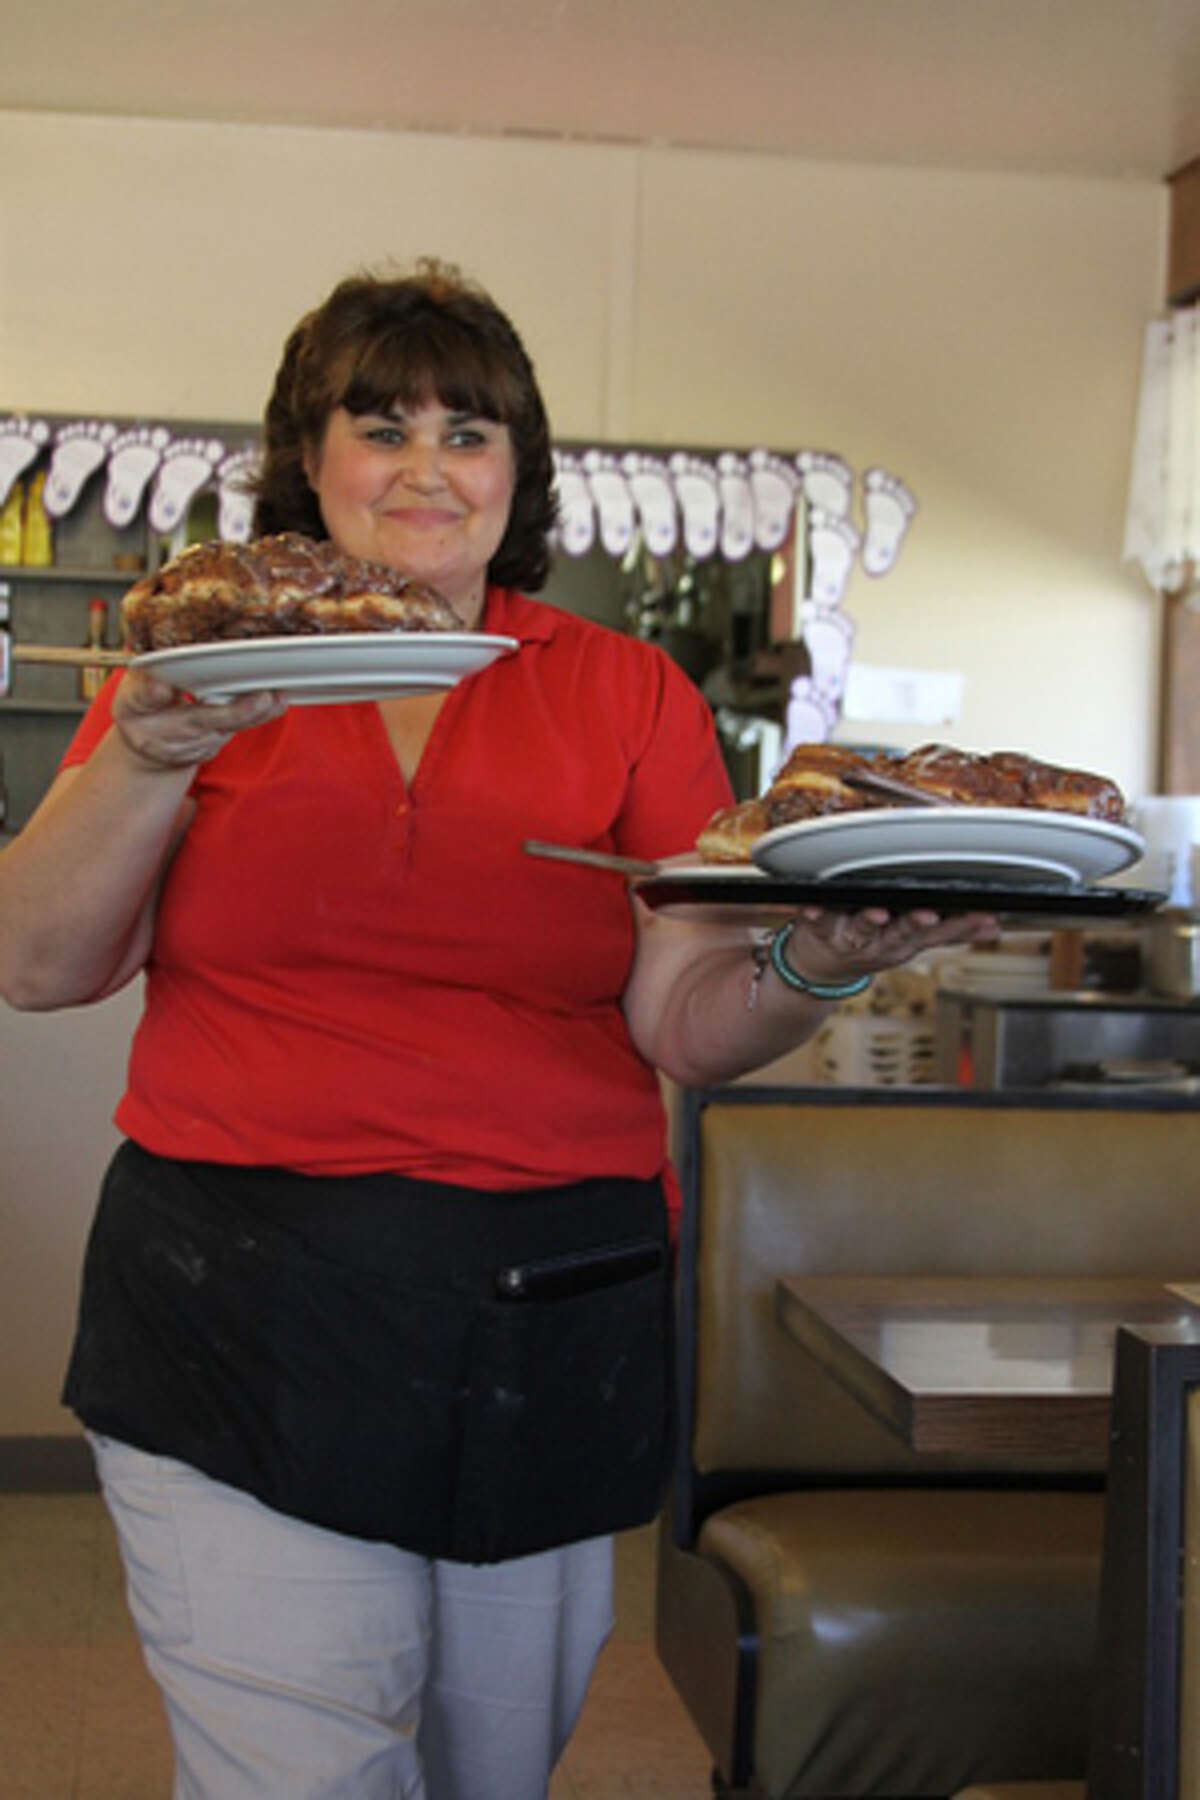 ORDER UP: Laurie Kogler serves up a trio of H&D Chuckwagon’s signature oversized doughnuts. The Reed City-based family-style restaurant prepares about 150 of the large baked goods each day. (Herald Review photos/Jonathan Eppley)